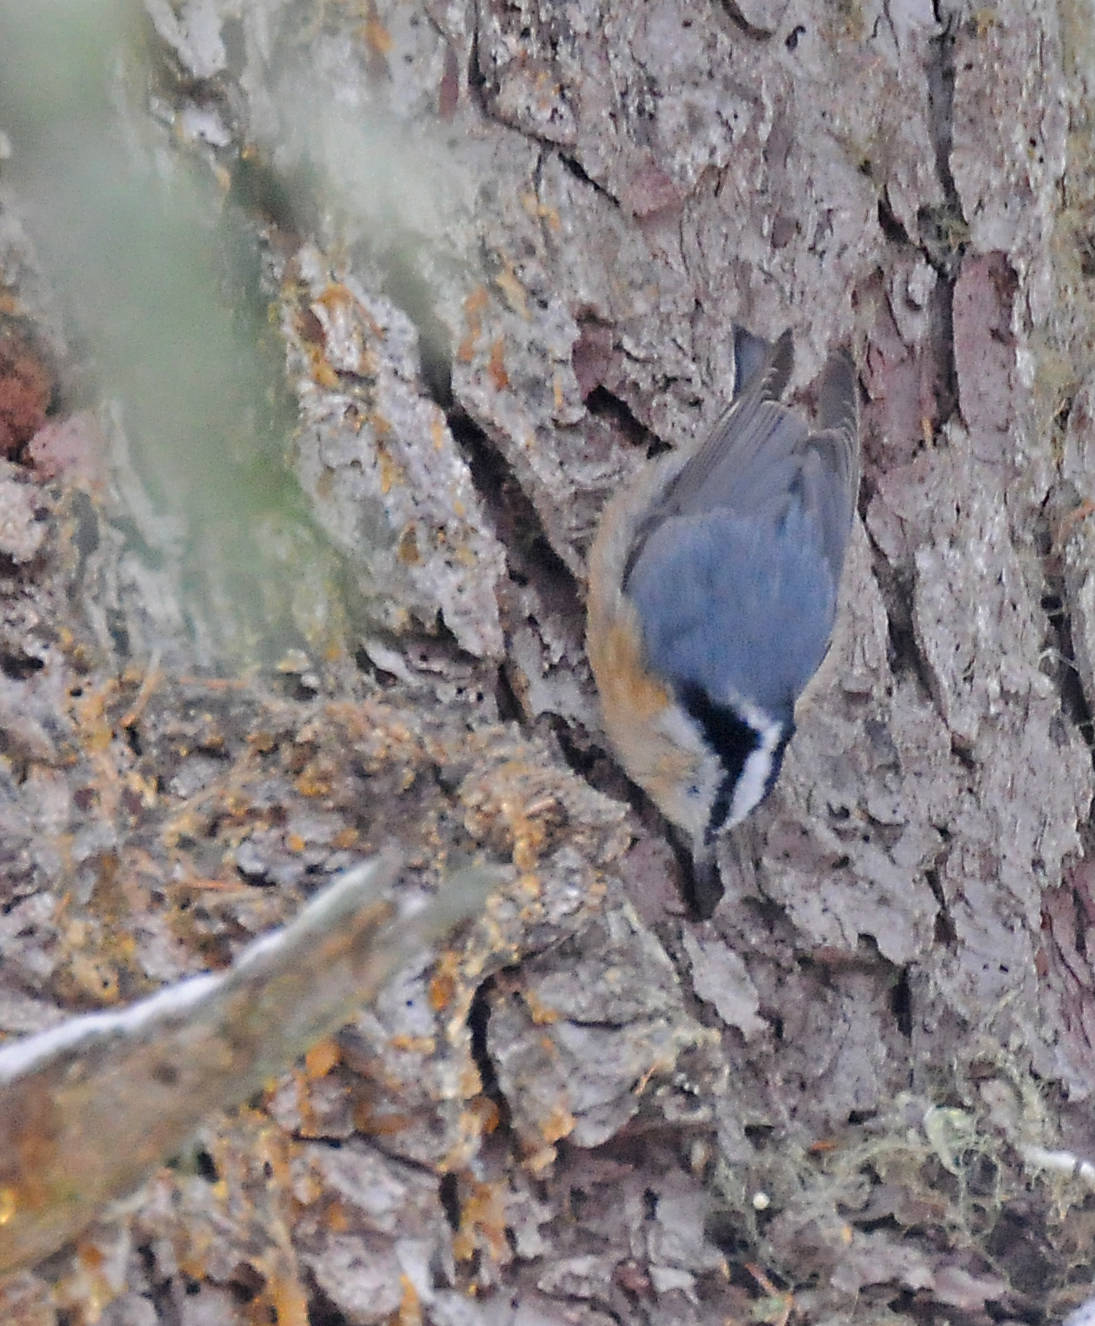 Red-breasted nuthatches can walk head-first down a tree trunk and even walk upside down underneath a branch. (Courtesy Photo / Bob Armstrong)